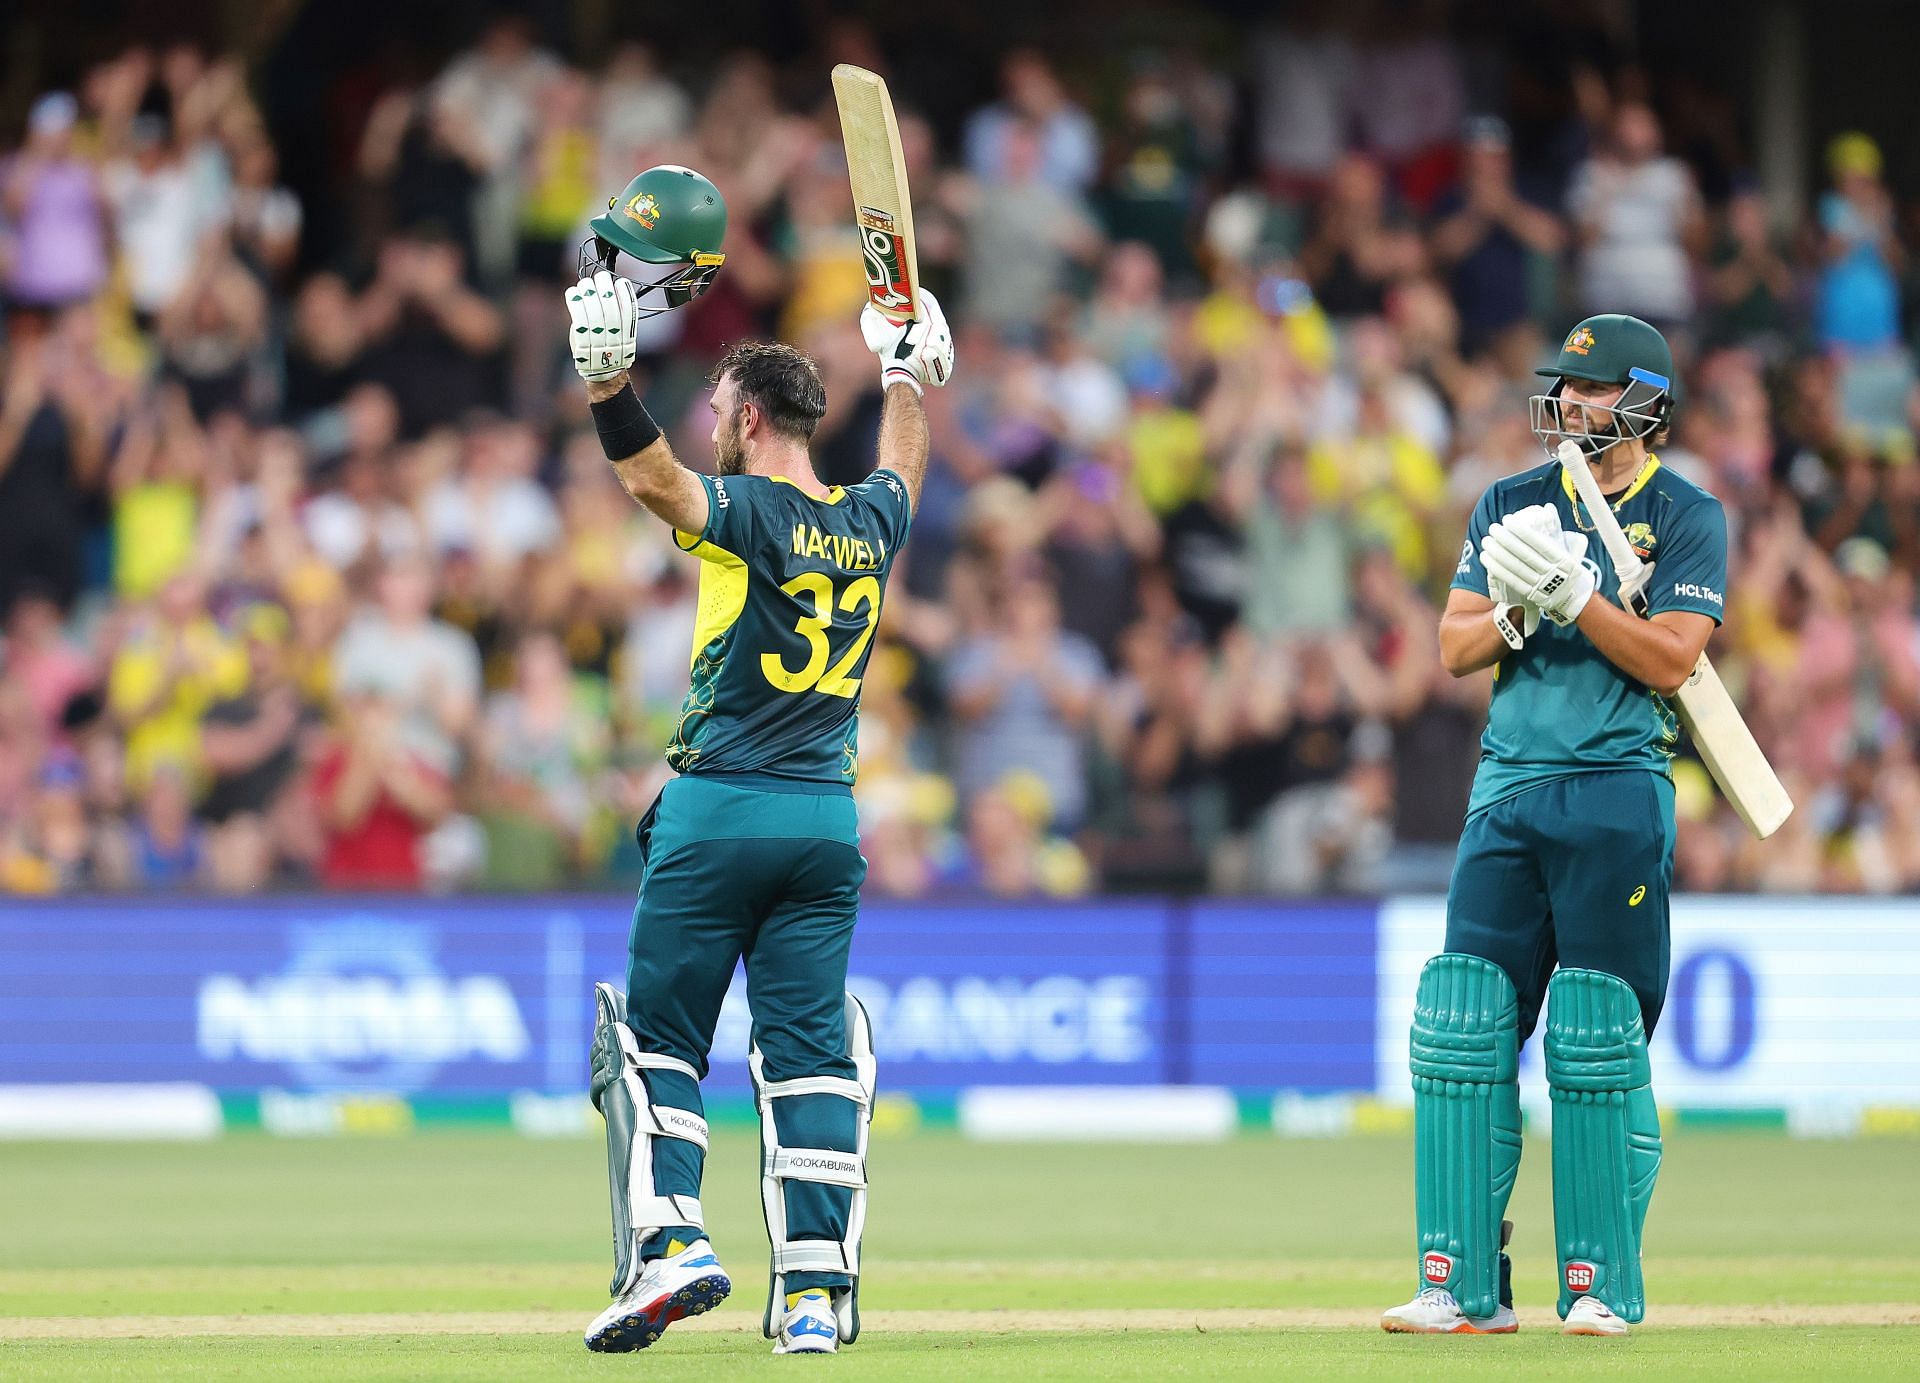 Glenn Maxwell celebrates his record-equalling ton. (Pic: Getty Images)